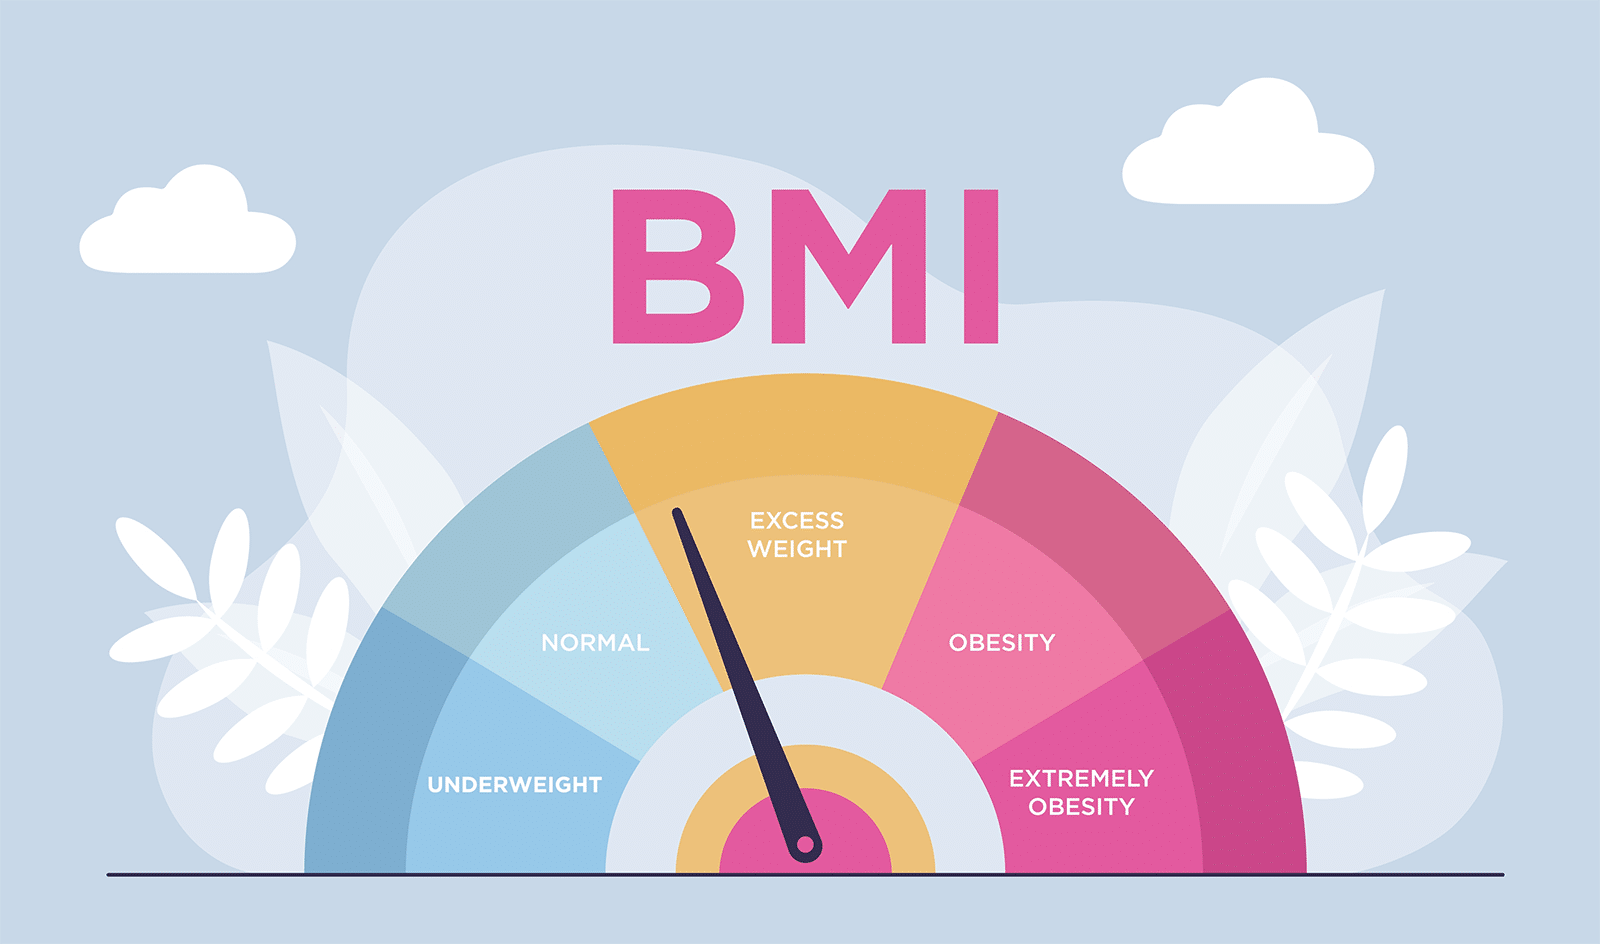 BMI Calculator: Healthy Weight Range and Beyond